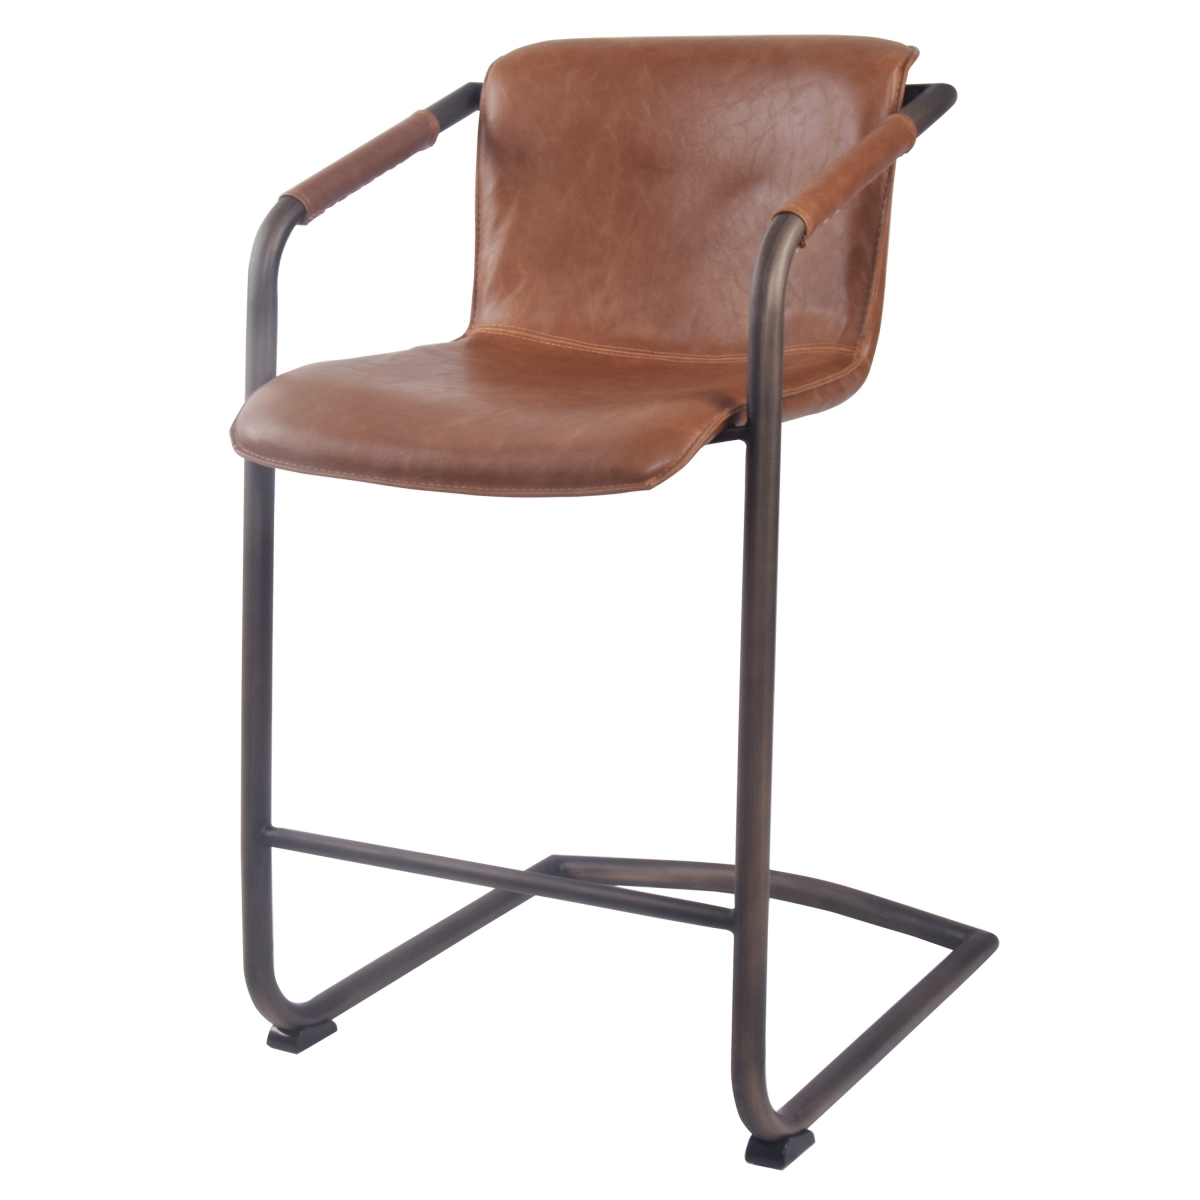 1060004-215 Indy Pu Leather Counter Stool, Antique Cigar Brown - Set Of 2